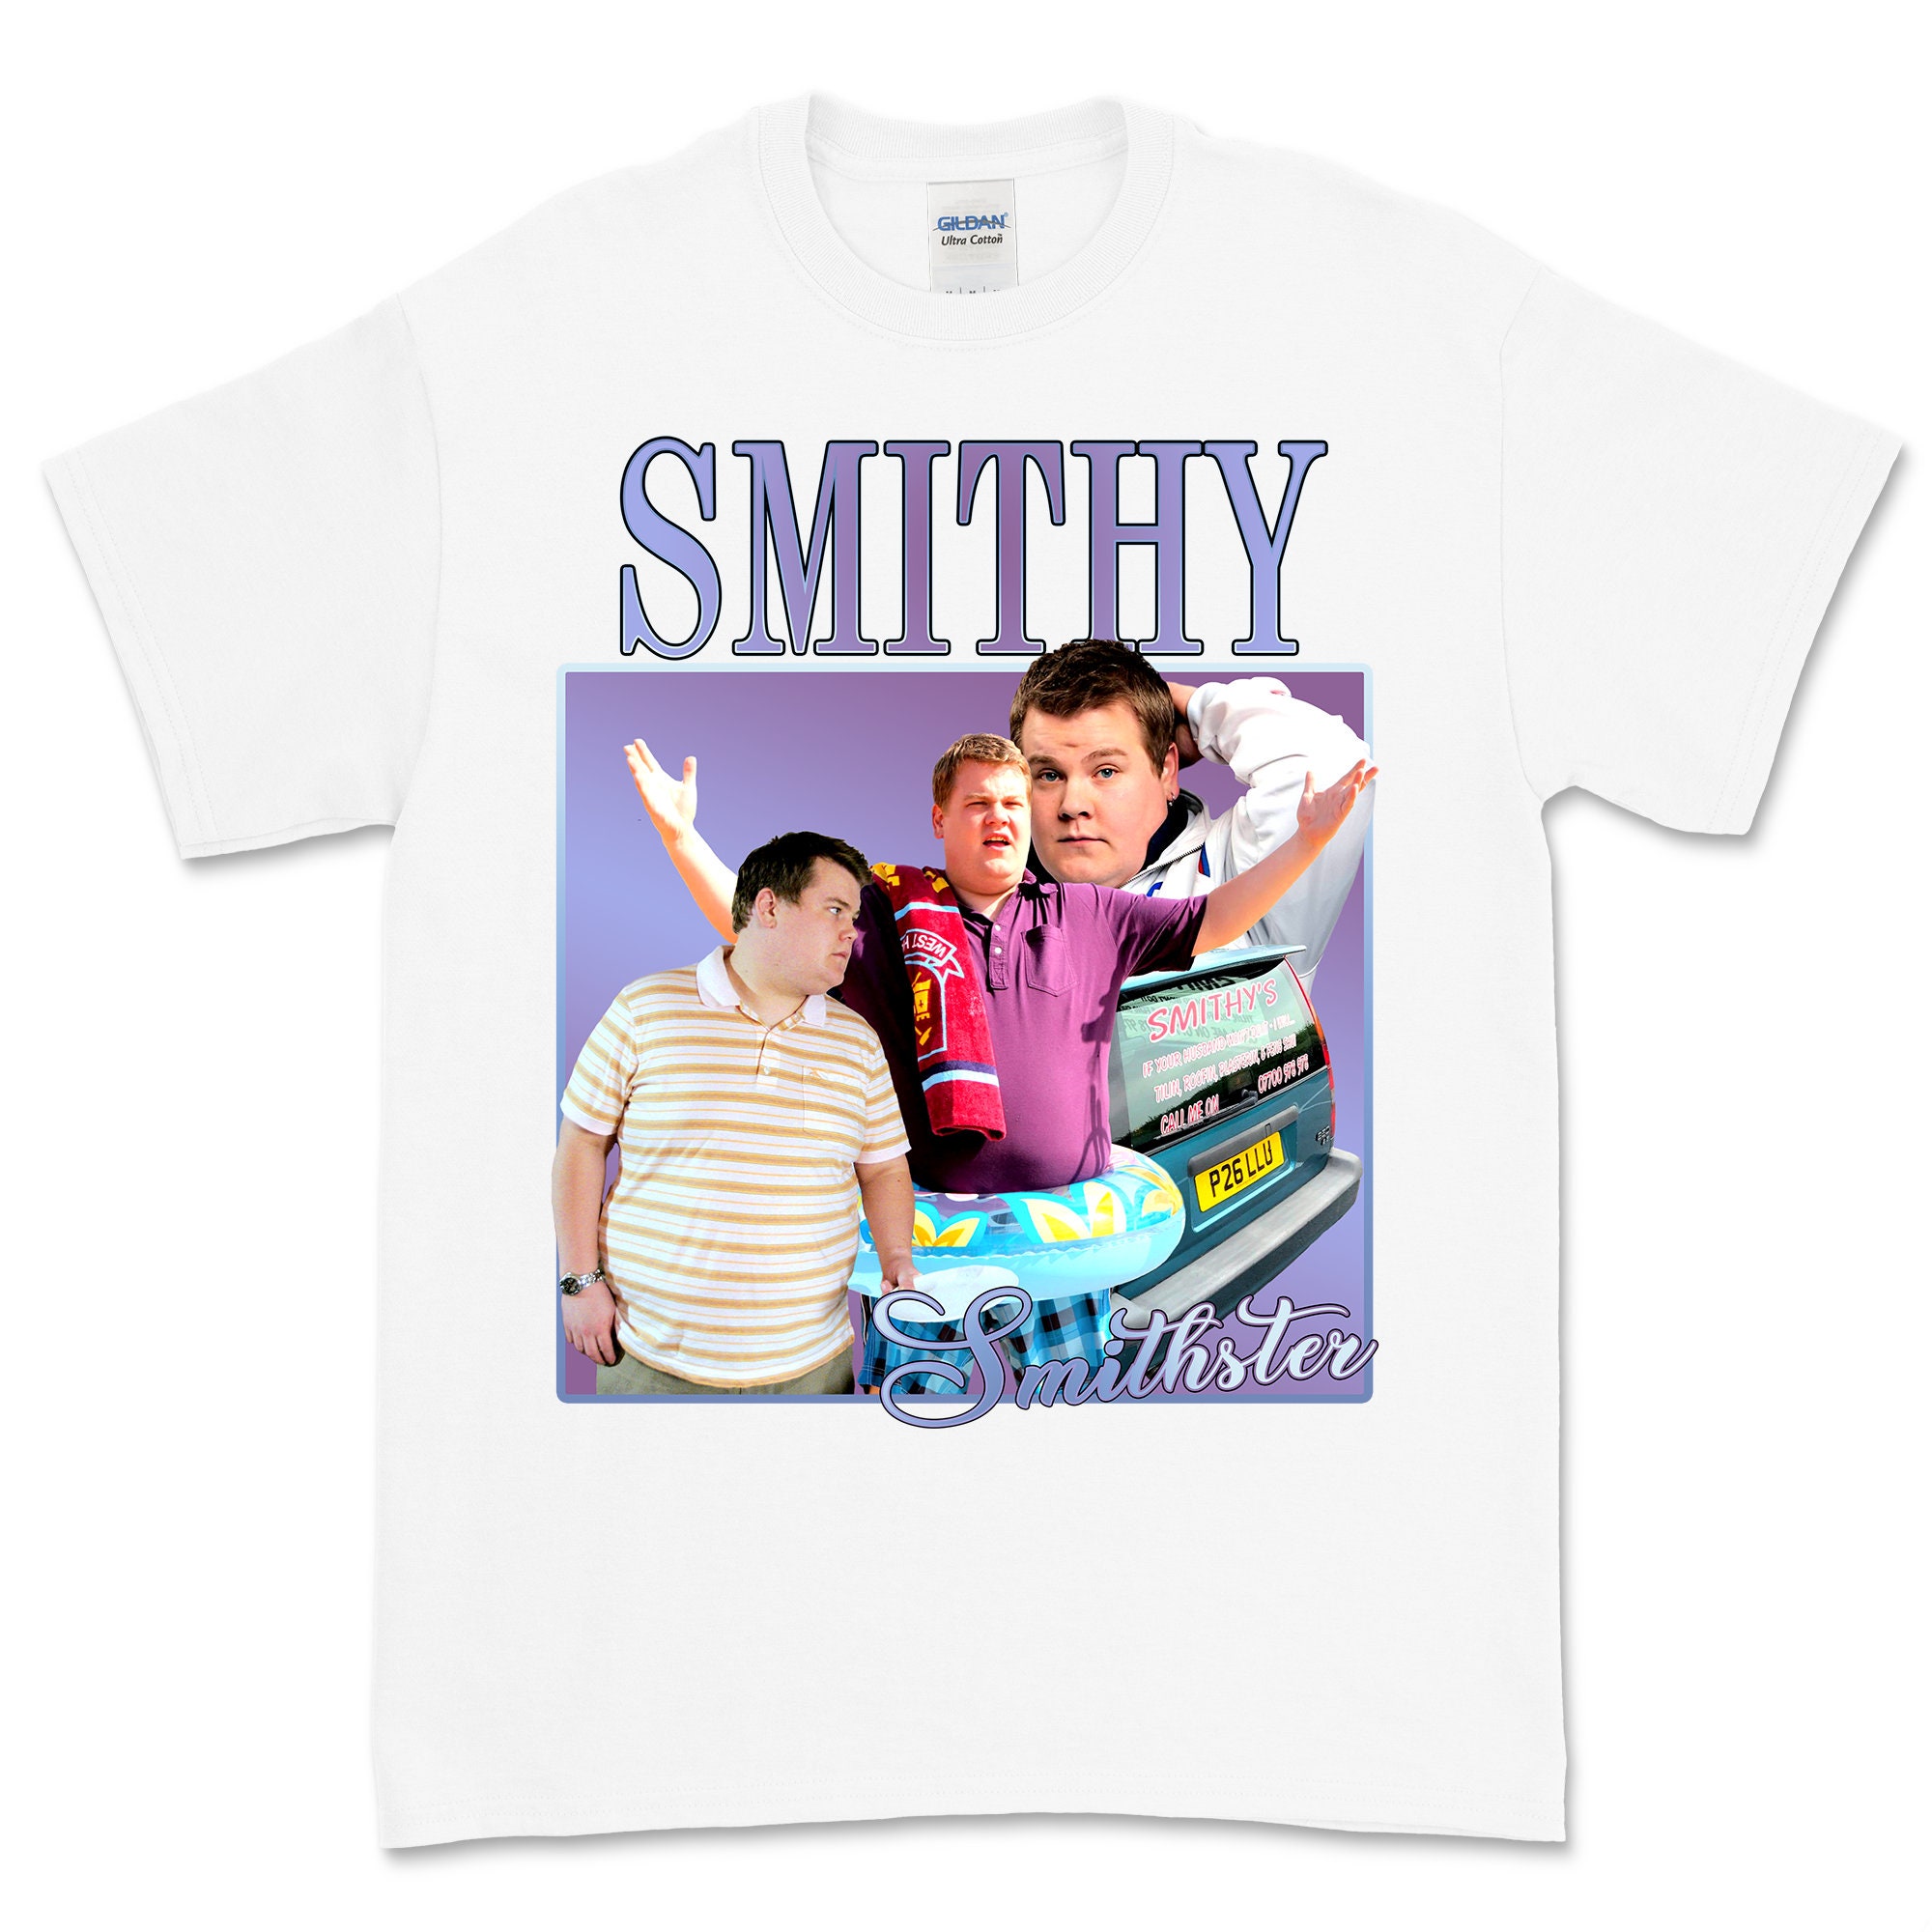 Discover NEIL SMITH Vintage T Shirt Homage, Unisex Smithy T-shirts